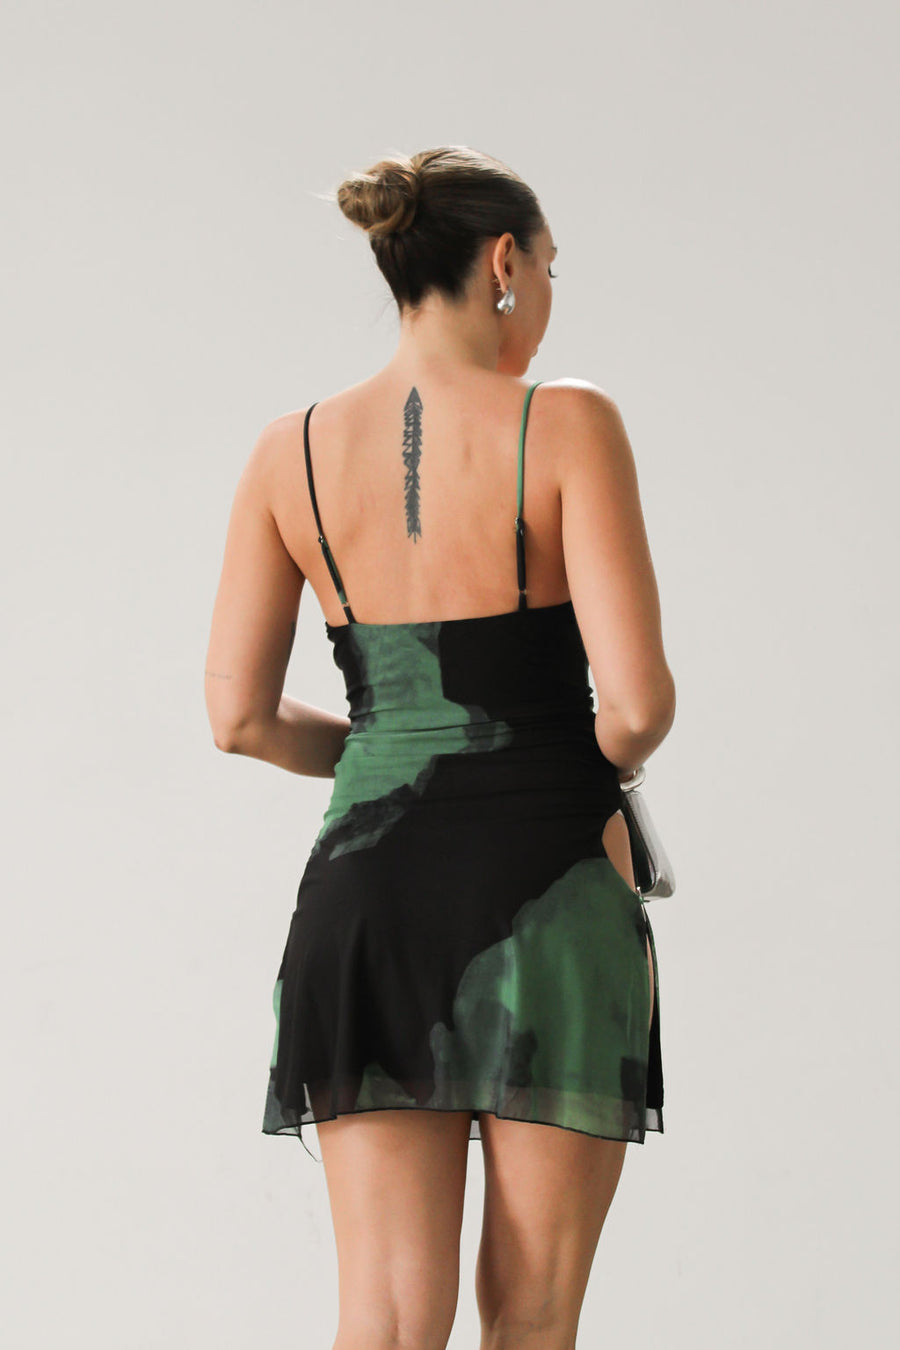 Printed knit mesh dress. Adjustable straps. Side slits with silver ring details. Fully lined. Green and black. Square neckline. 